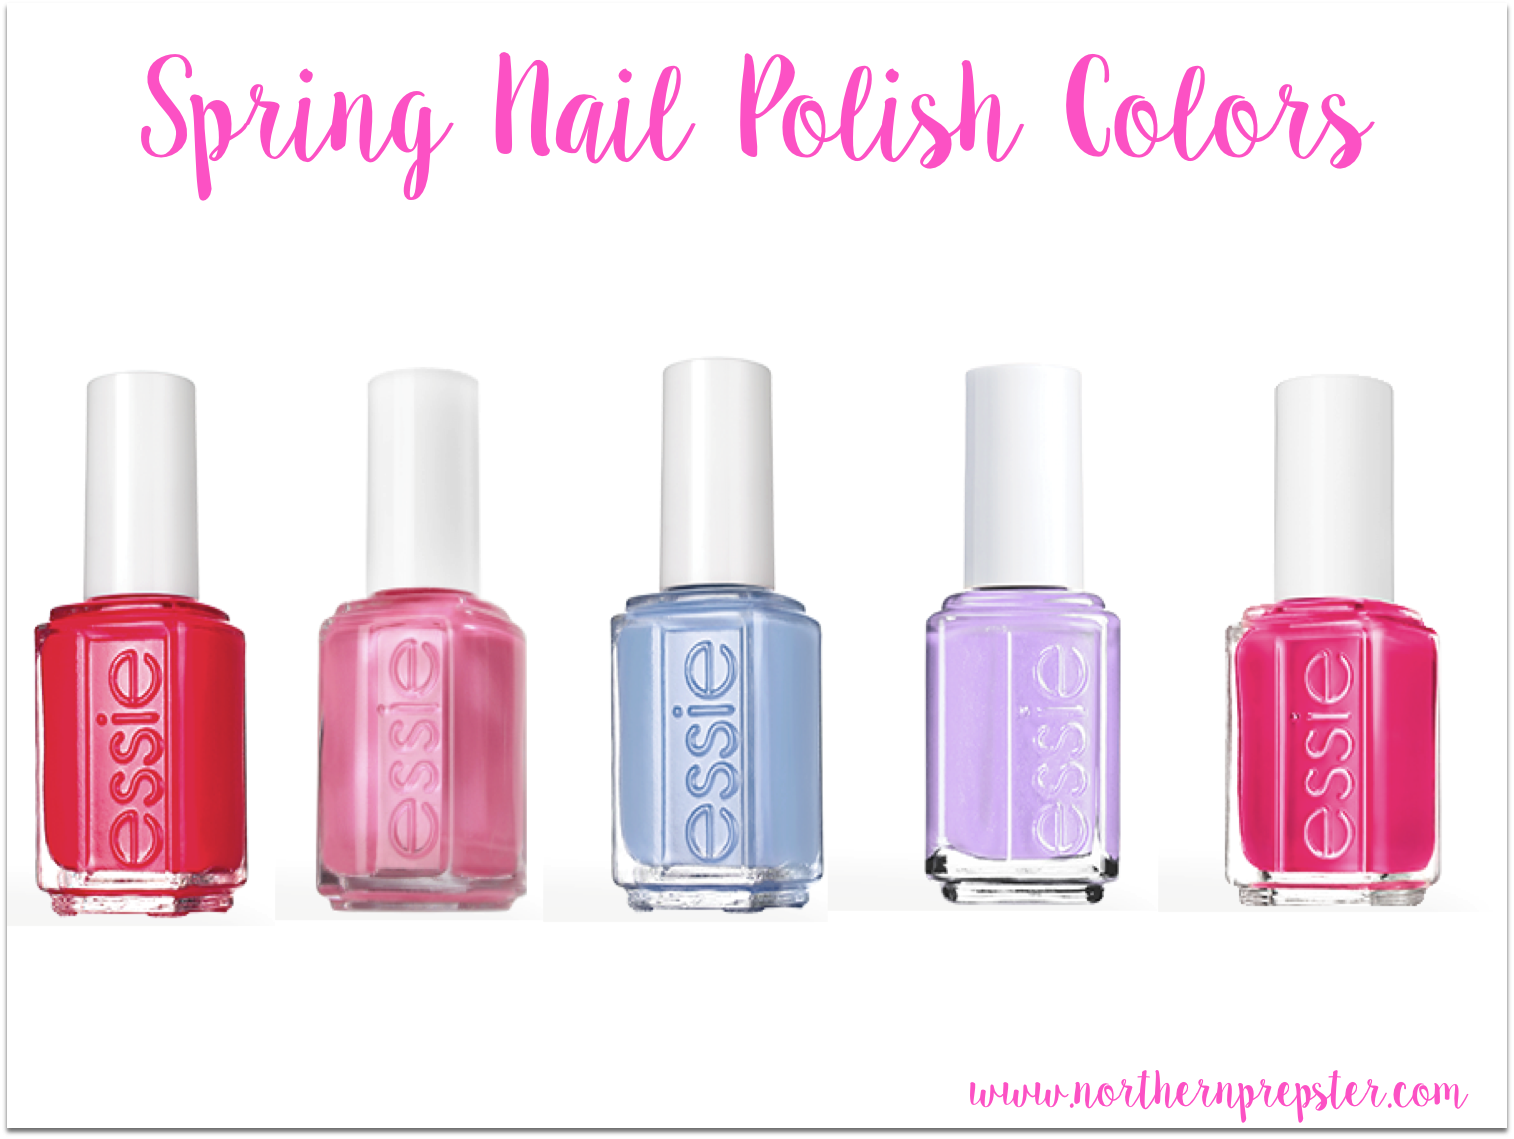 7. "The Most Beautiful Nail Polish Colors for Spring" - wide 9